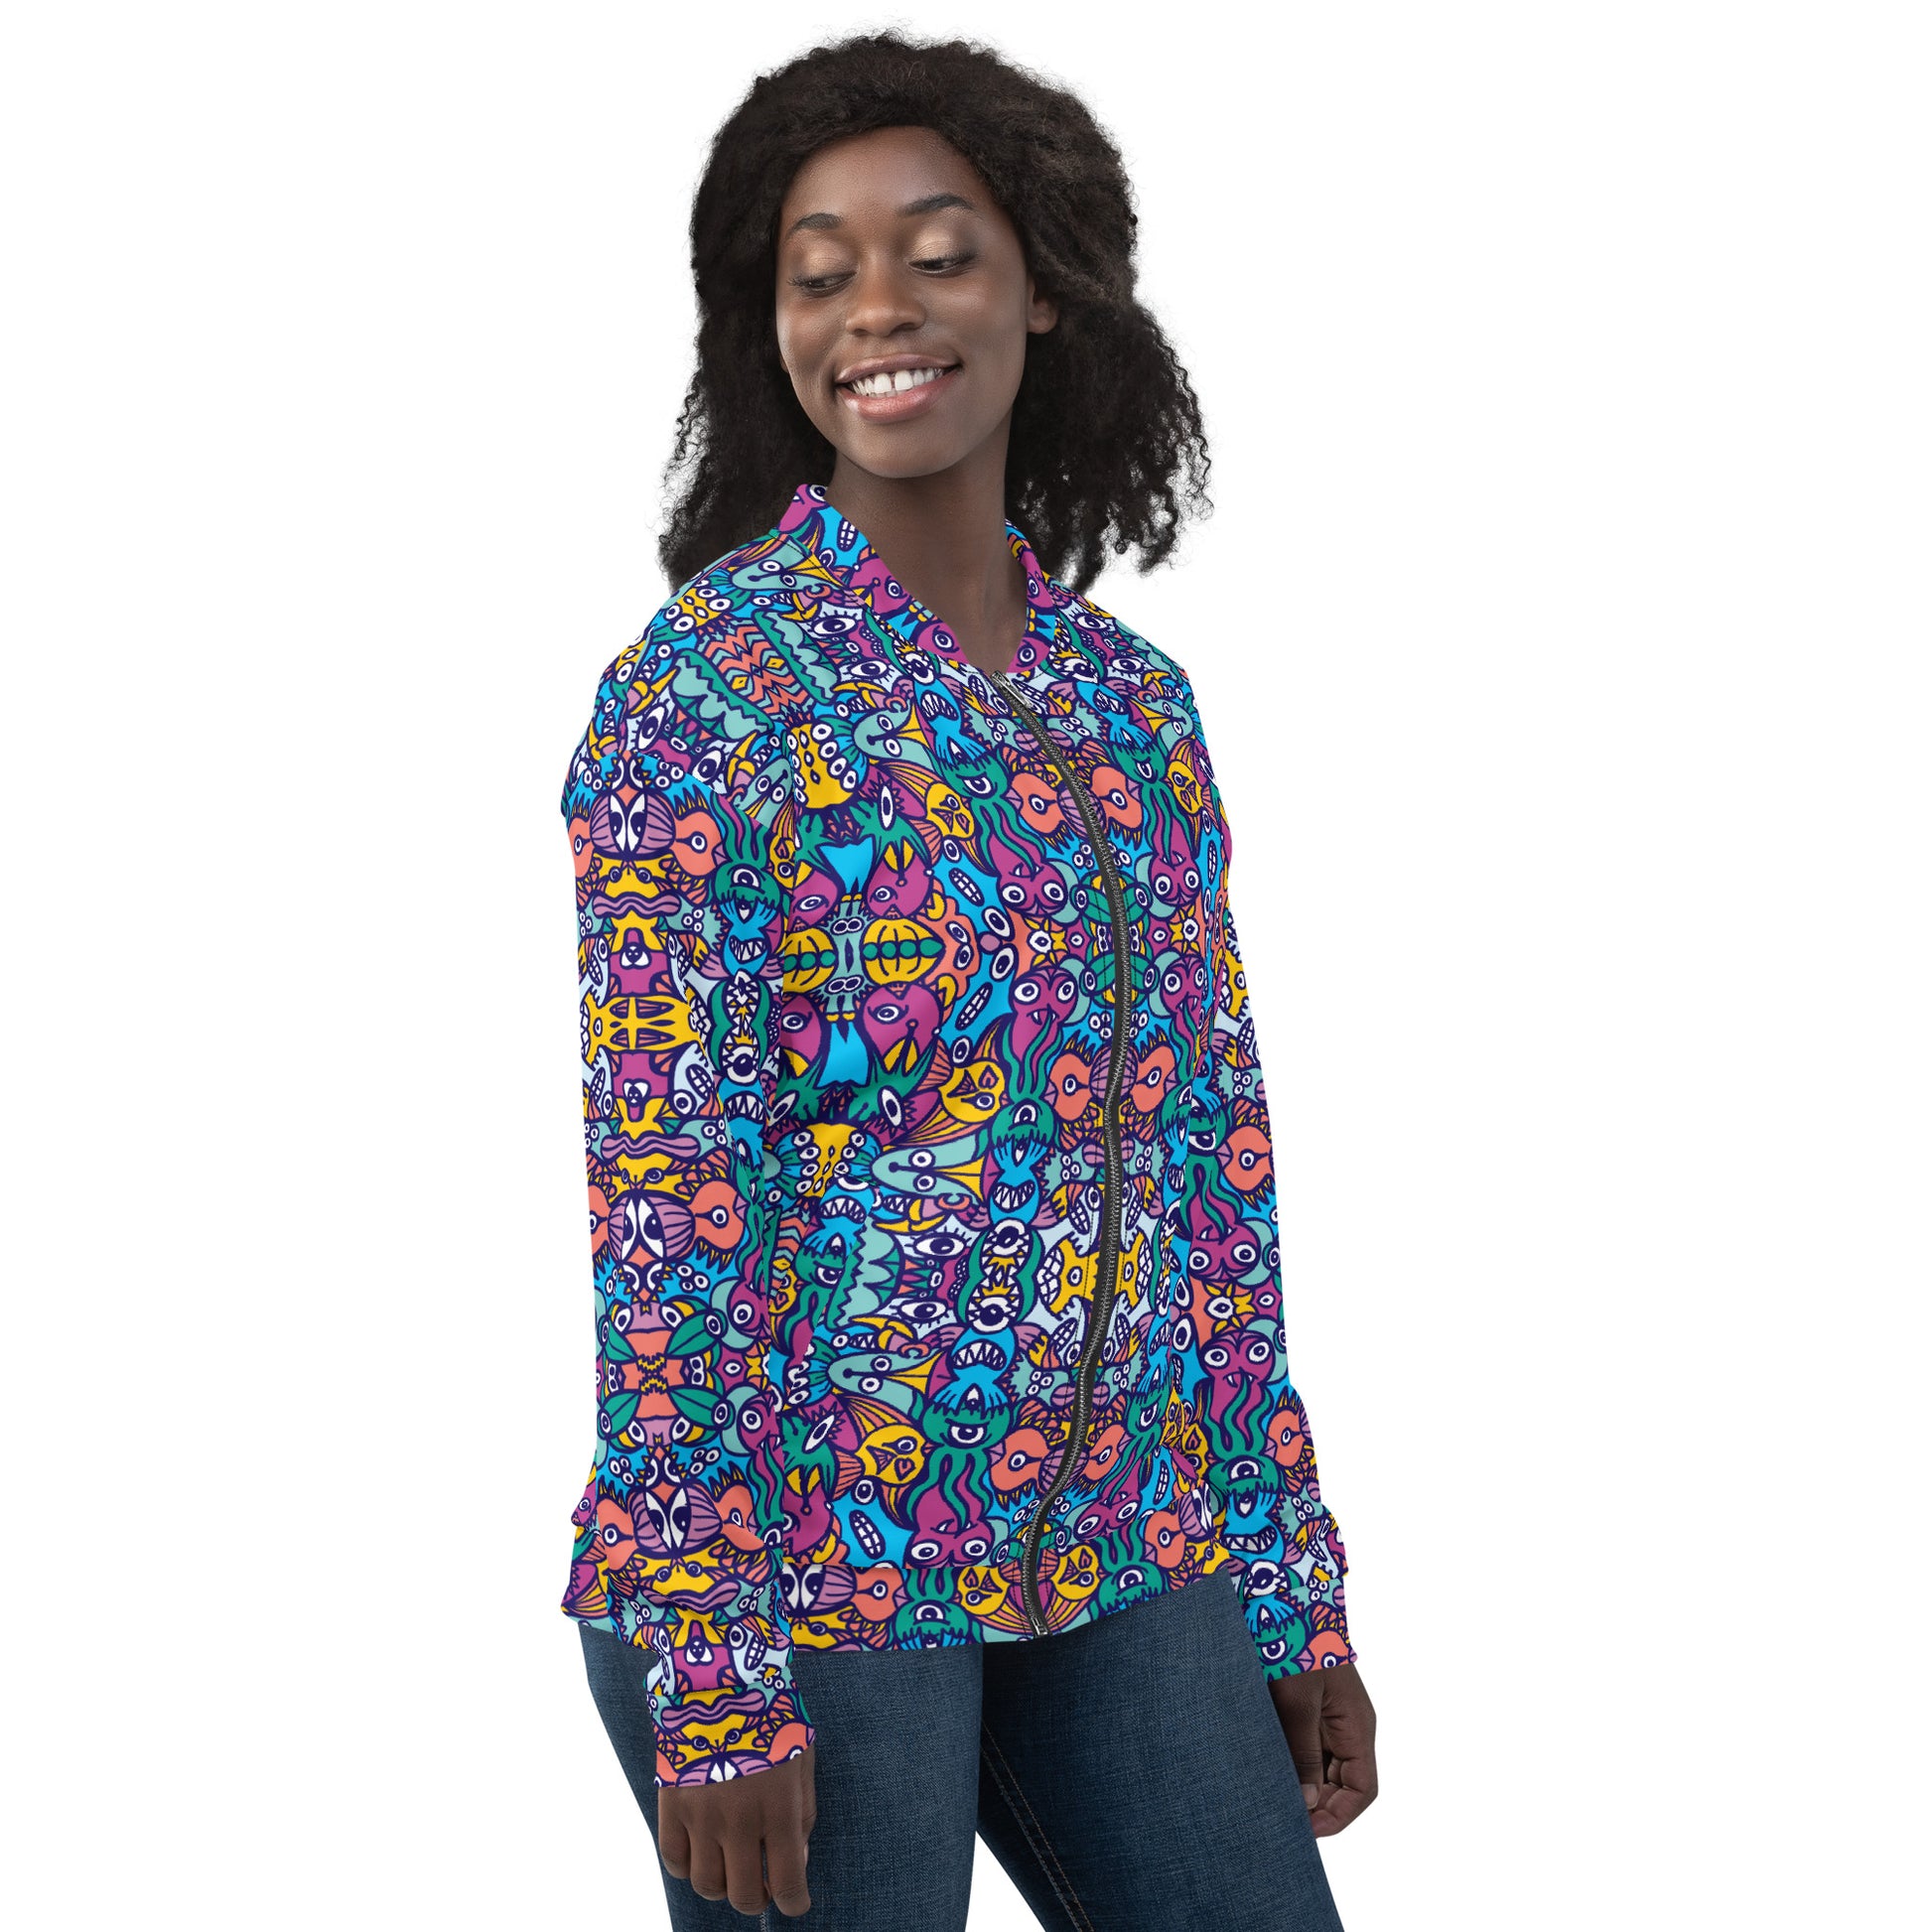 Smiling woman wearing Unisex Bomber Jacket All over printed with Whimsical design featuring multicolor critters from another world